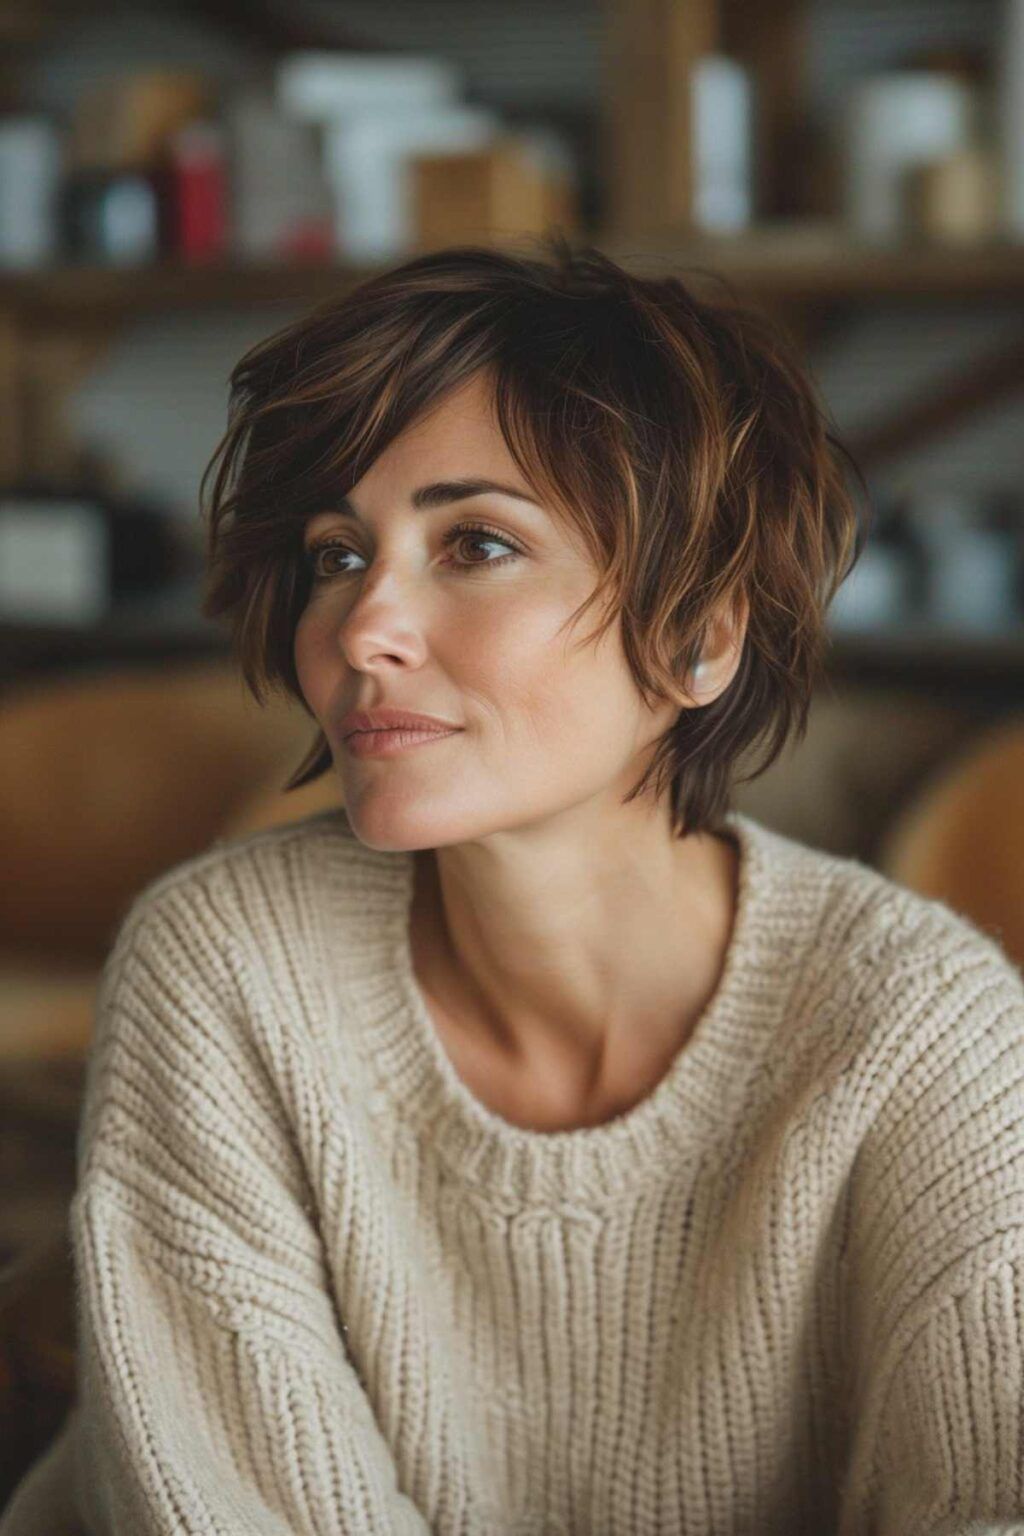 Top Tips for Styling Short Hair Like a Pro